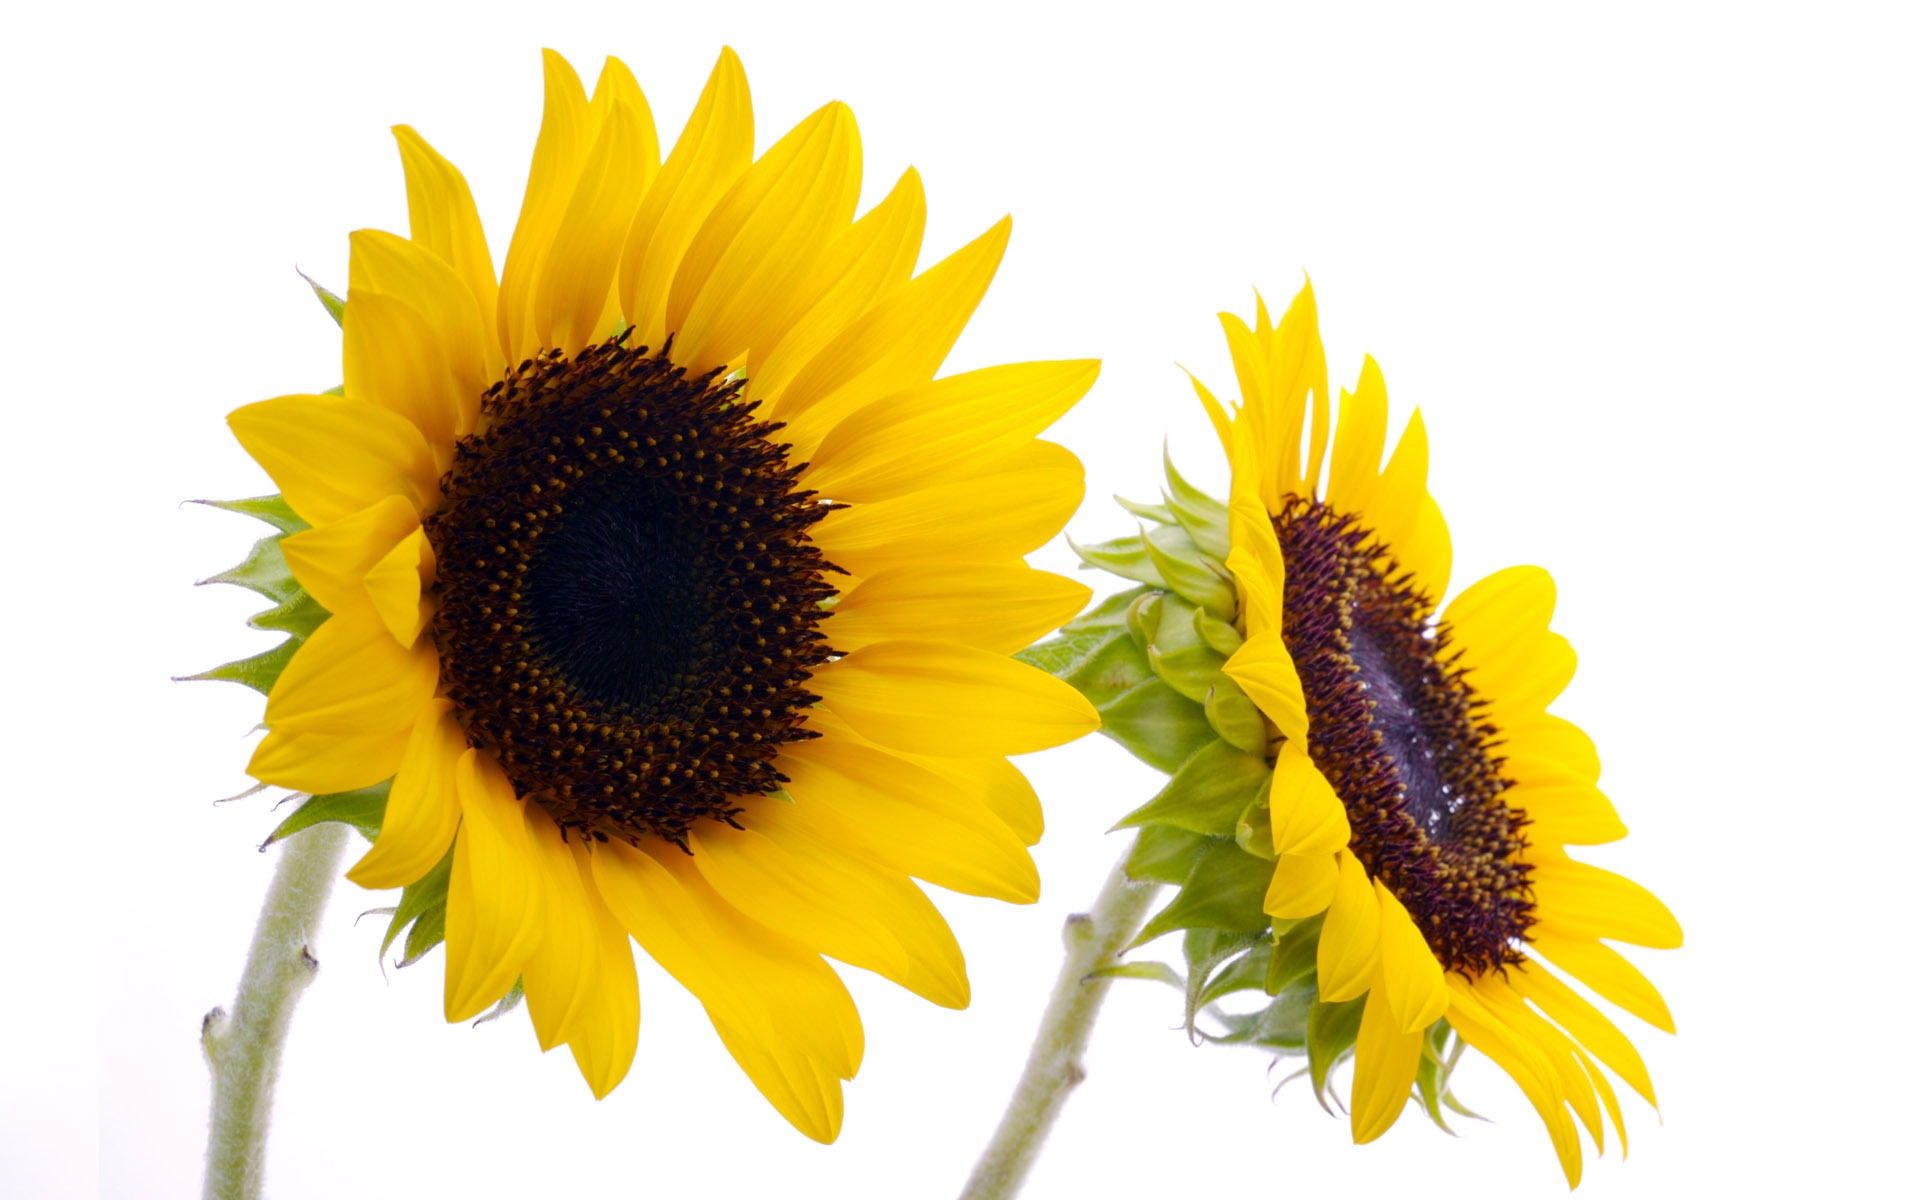 Sunny sunflower photo HD Wallpapers #28 - 1920x1200